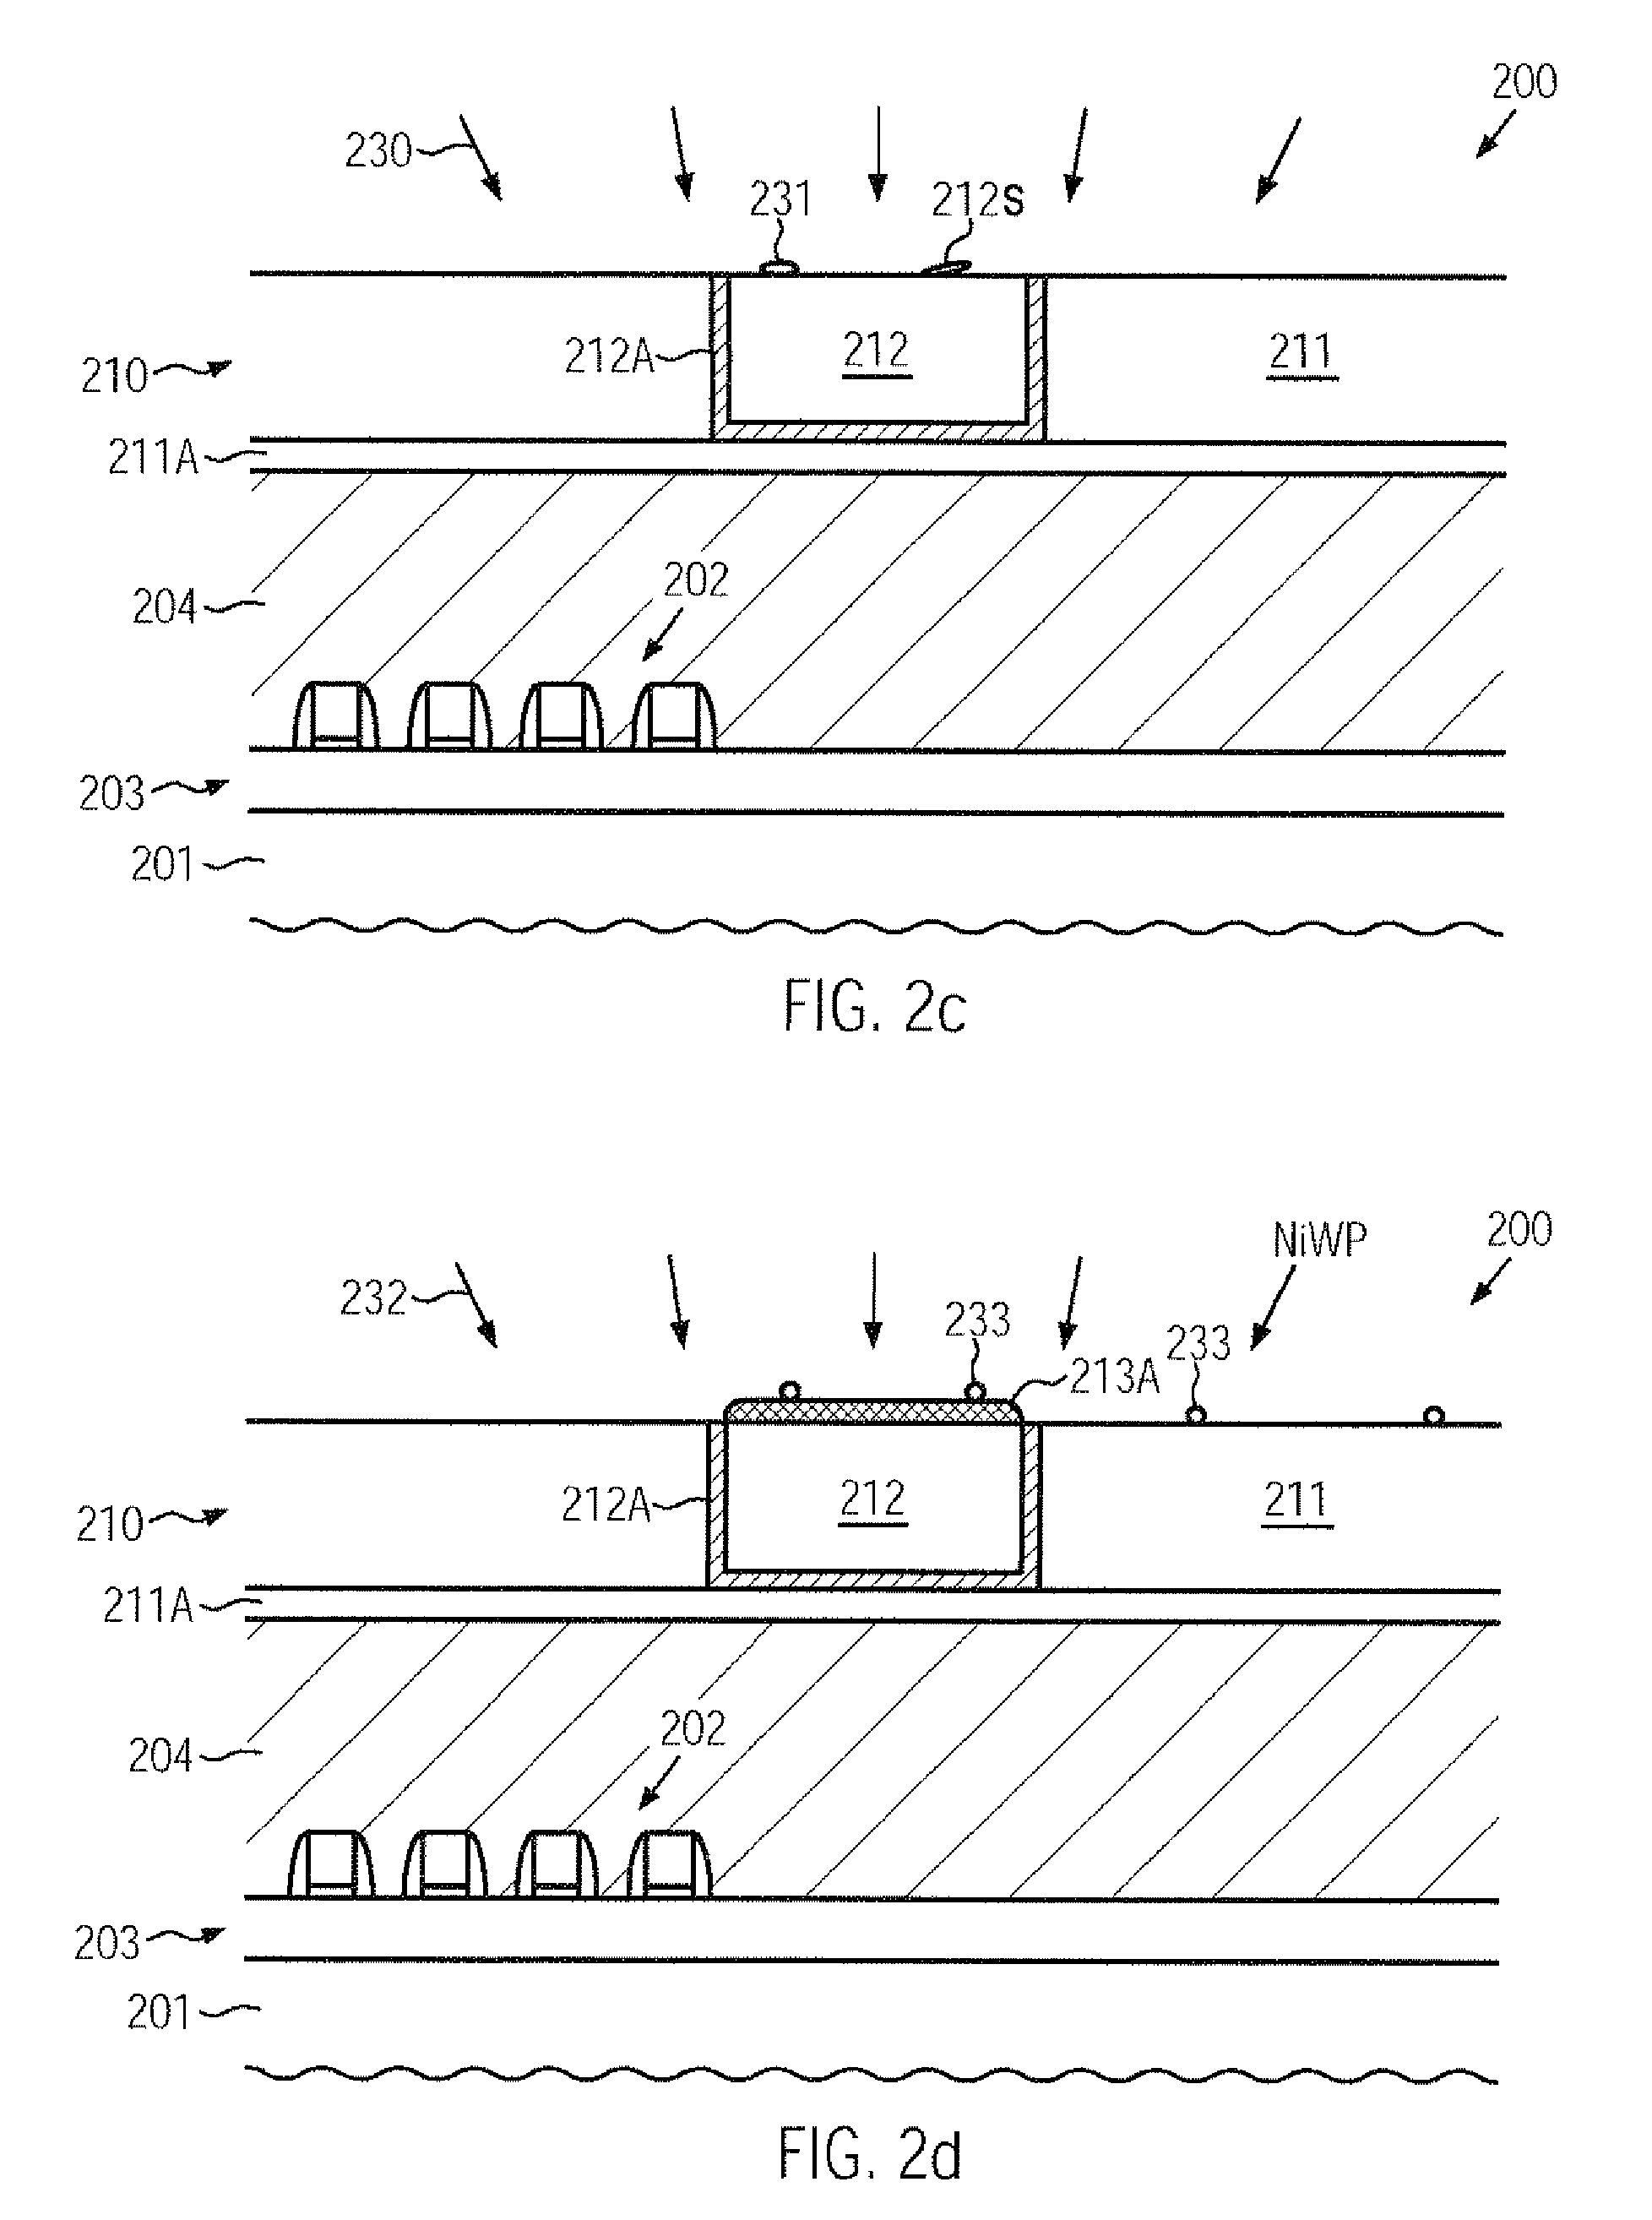 Metal cap layer of increased electrode potential for copper-based metal regions in semiconductor devices